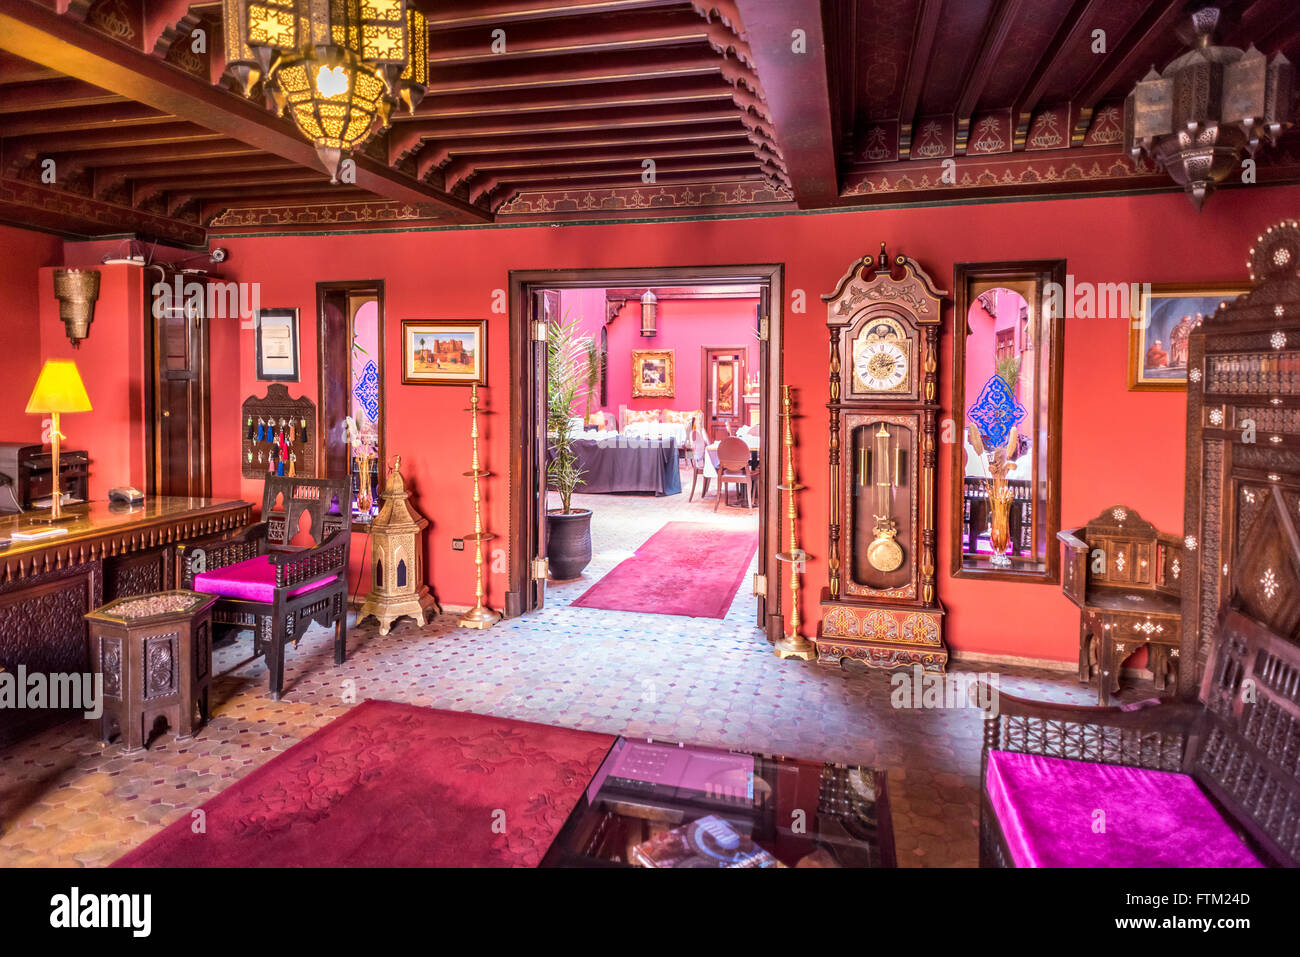 Typical Riad in the Moroccan city of Marrakech. Stock Photo